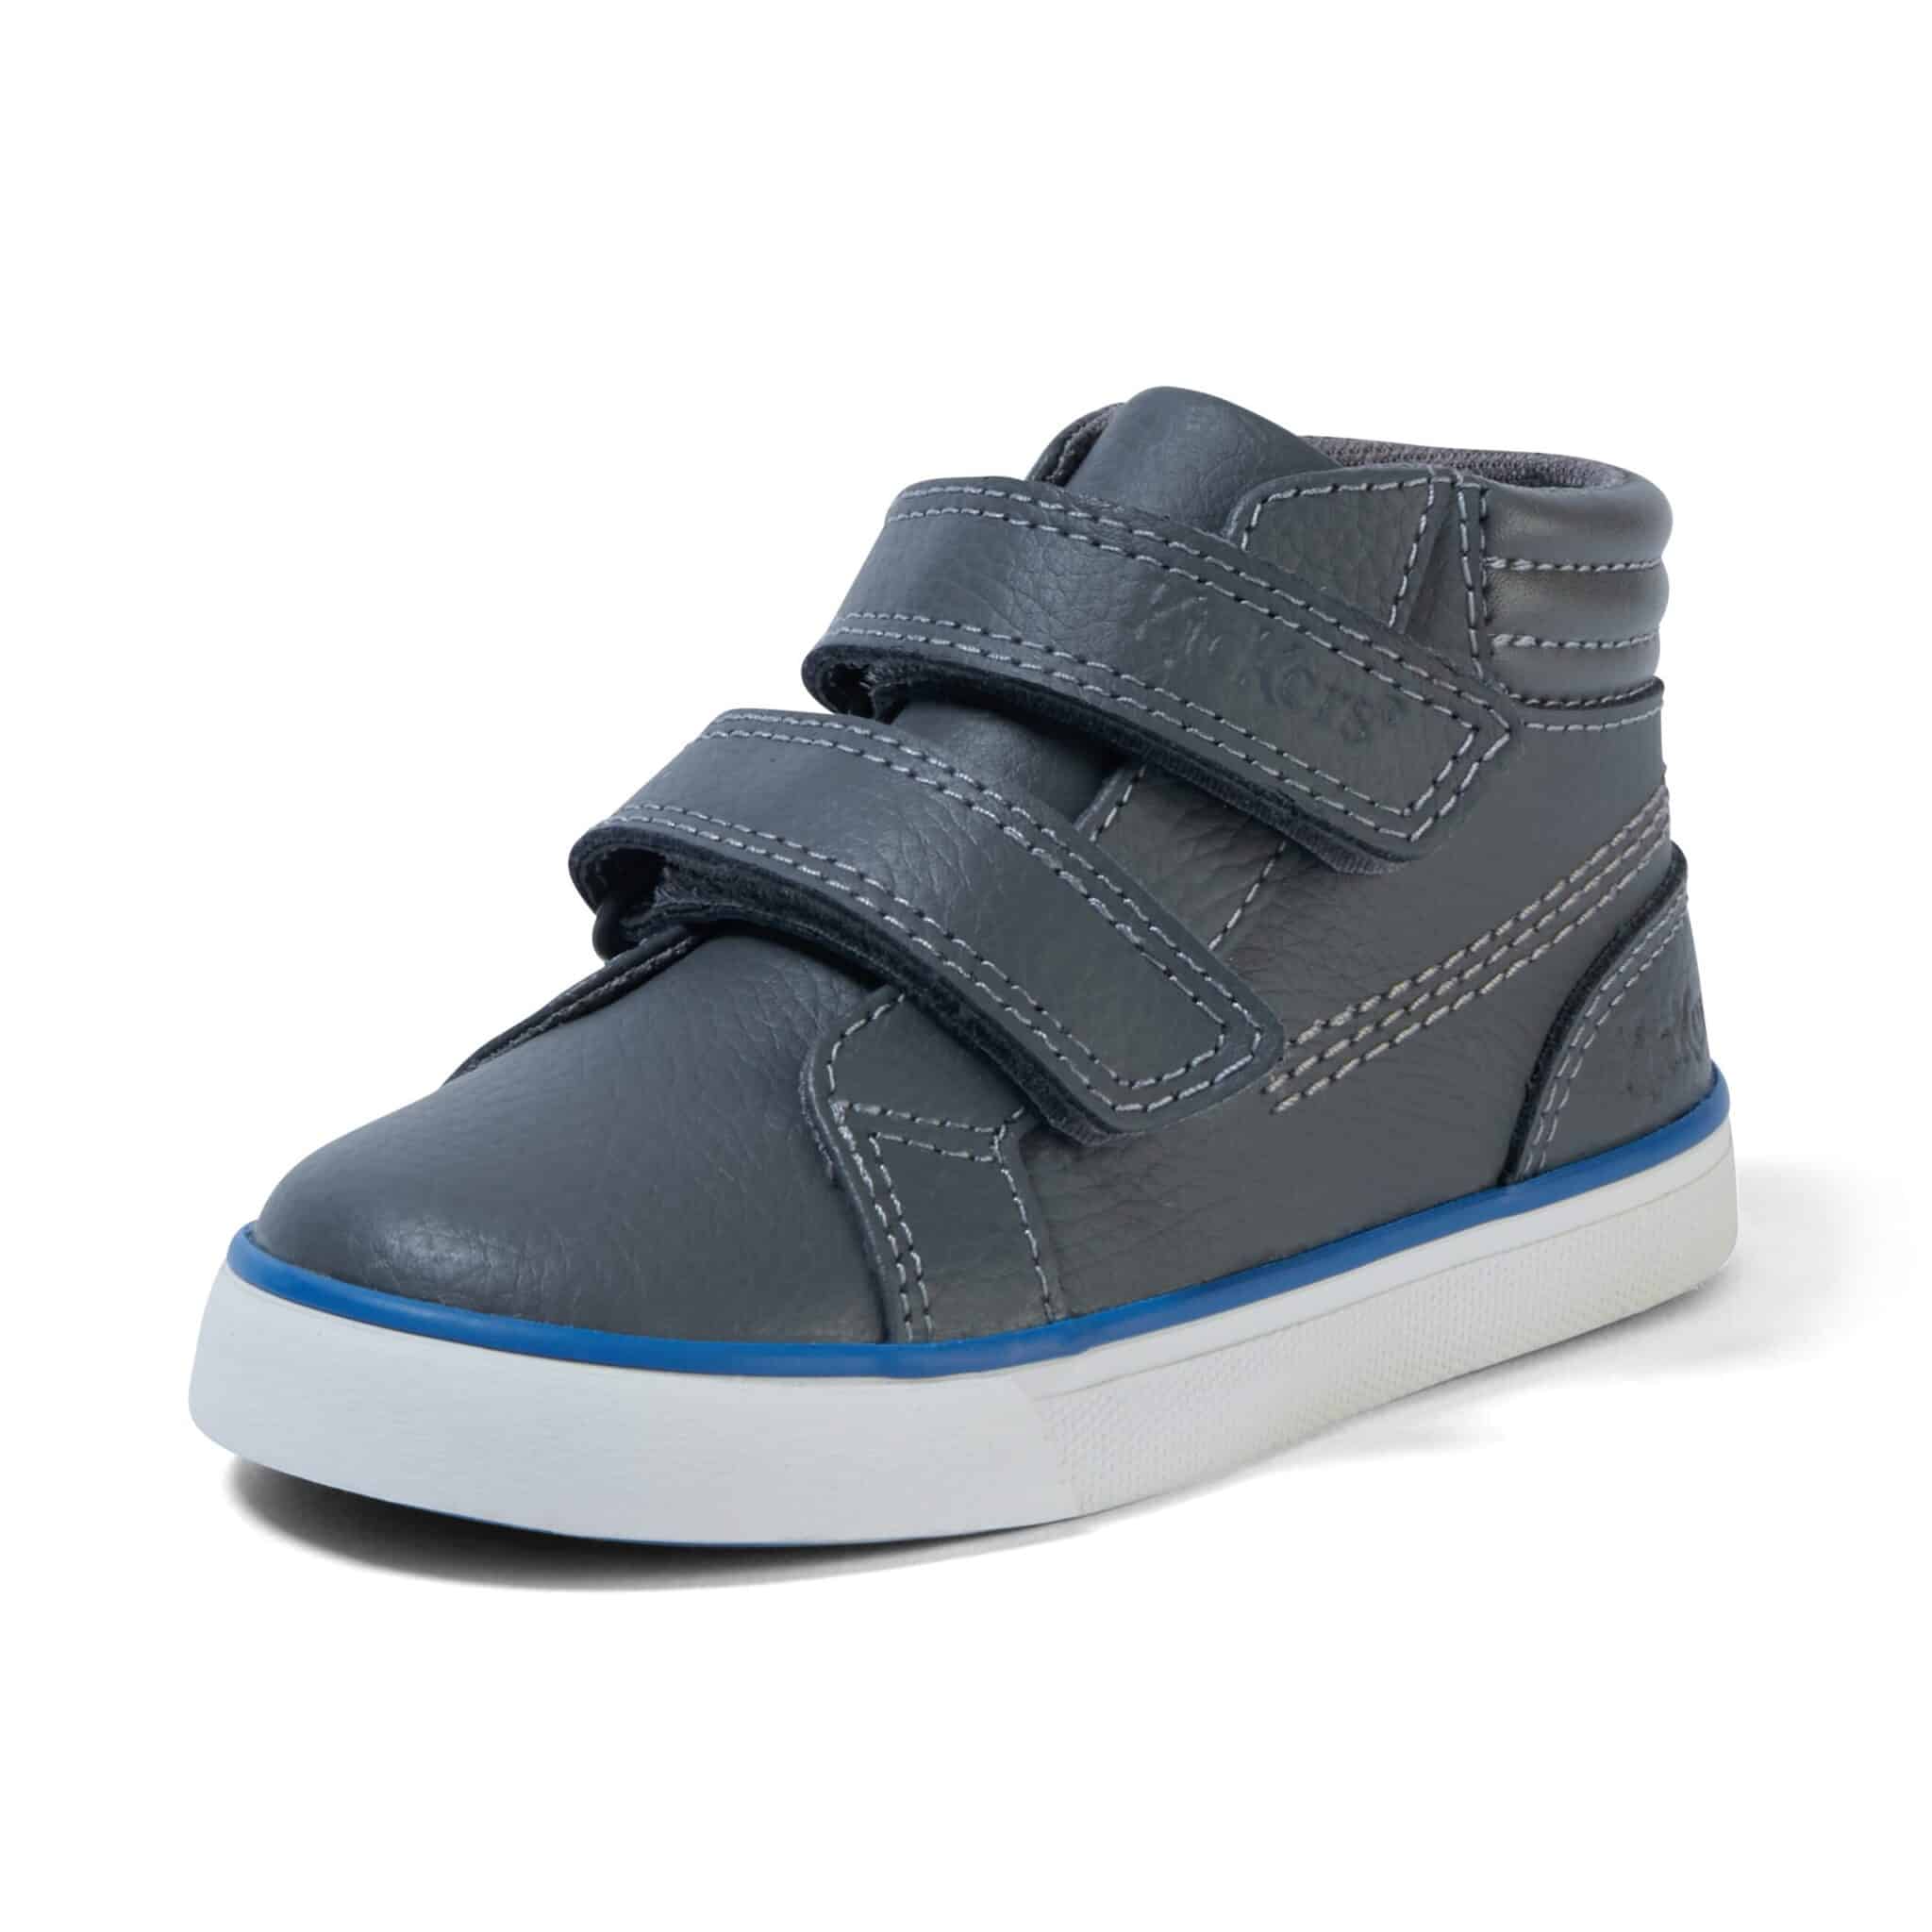 kickers tovni navy boys hi top leather shoes side